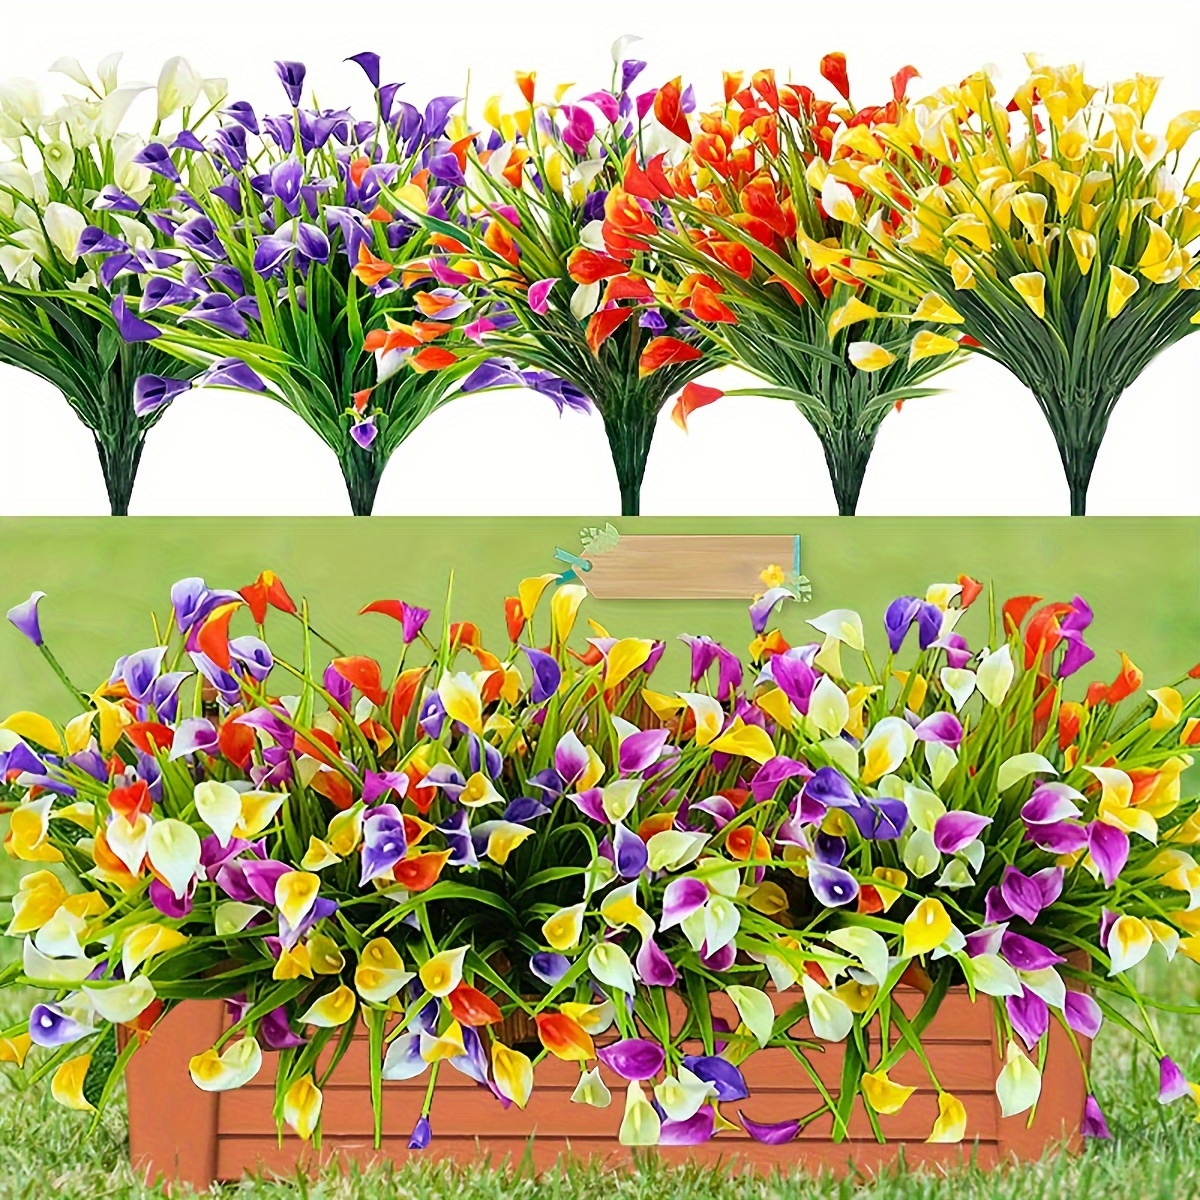 

5 Bundles Artificial Fake Flowers For Outdoors Plastic Flowers Calla Lily, Uv Resistant Plastic Artificial Plants, Fake Flowers Inside Decor For Garden Hanging Planter (mixed)